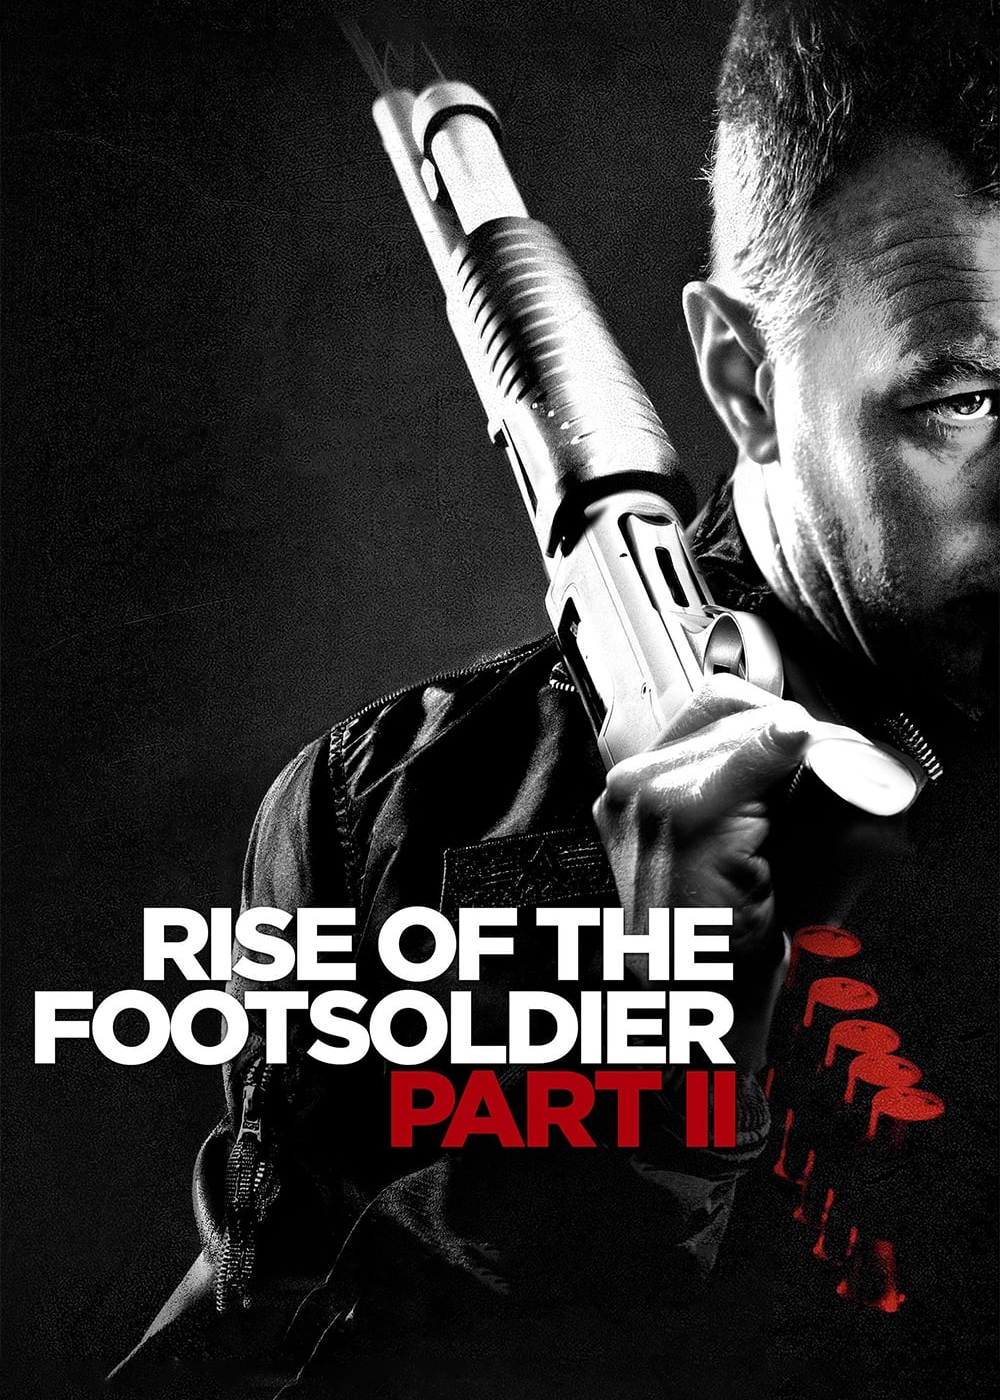 Poster Phim Rise of the Footsoldier Part II (Rise of the Footsoldier Part II)